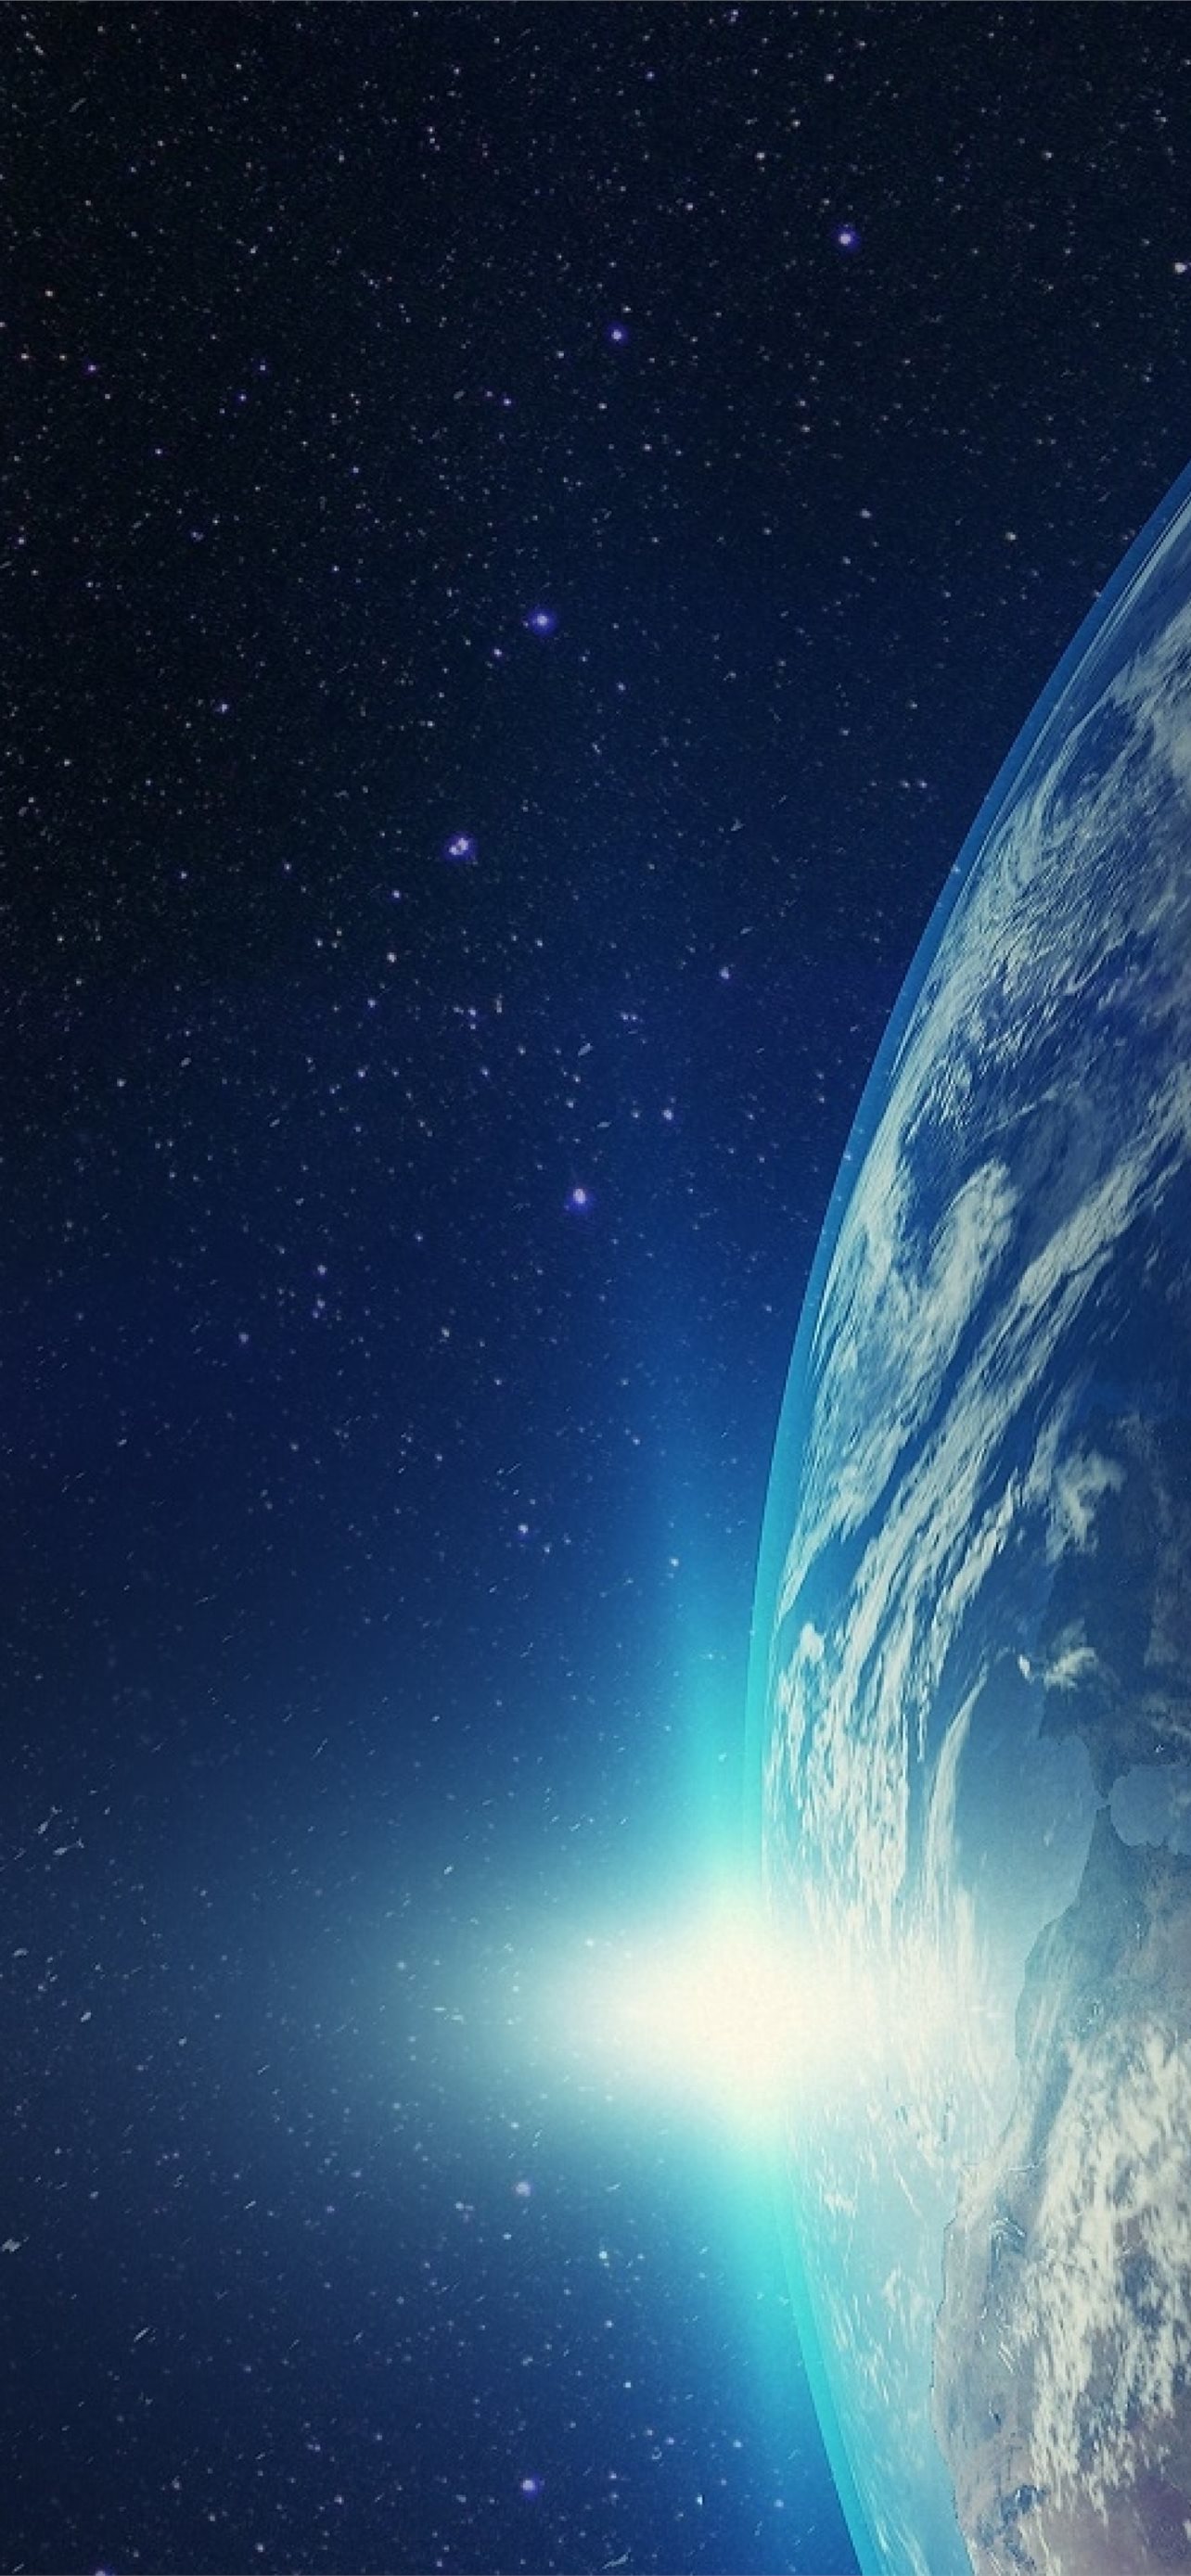 Earth From Space Stars Universe for Samsung Galaxy. iPhone Wallpaper Free Download